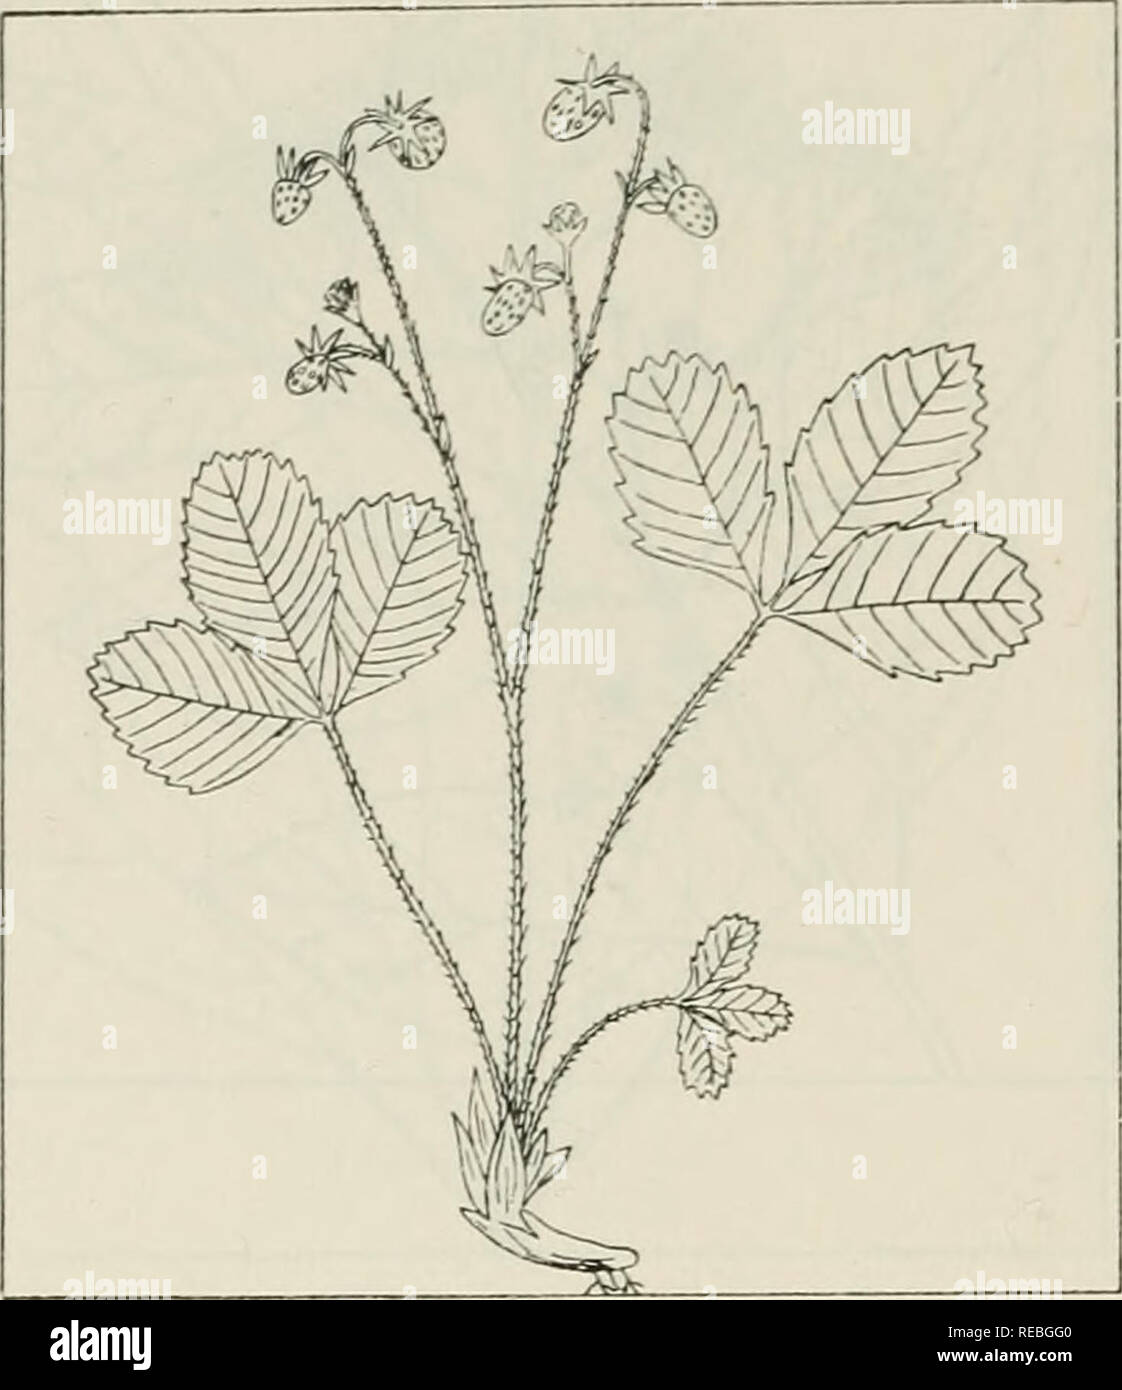 . The drug plants of Illinois. Botany, Medical; Botany. 56 ILLINOIS NATURAL HISTORY SURVEY Circular 44. FRAGARIA VESGA L. Strawberry. Alpine strawberry. Rosaceae. The leaves collected, also the fruit. Cultivated in home and farm gardens throughout the state and locally in many places in fields of some size; persists after being planted but does not become estab- lished. The fruit contains salicylic acid and malic acid. Said to have astringent and diuretic properties but is valuable chiefly for the fruit syrup which is used as a pleasant ve- hicle for medicines.  Fragaria 'virginiana Dene., Vi Stock Photo